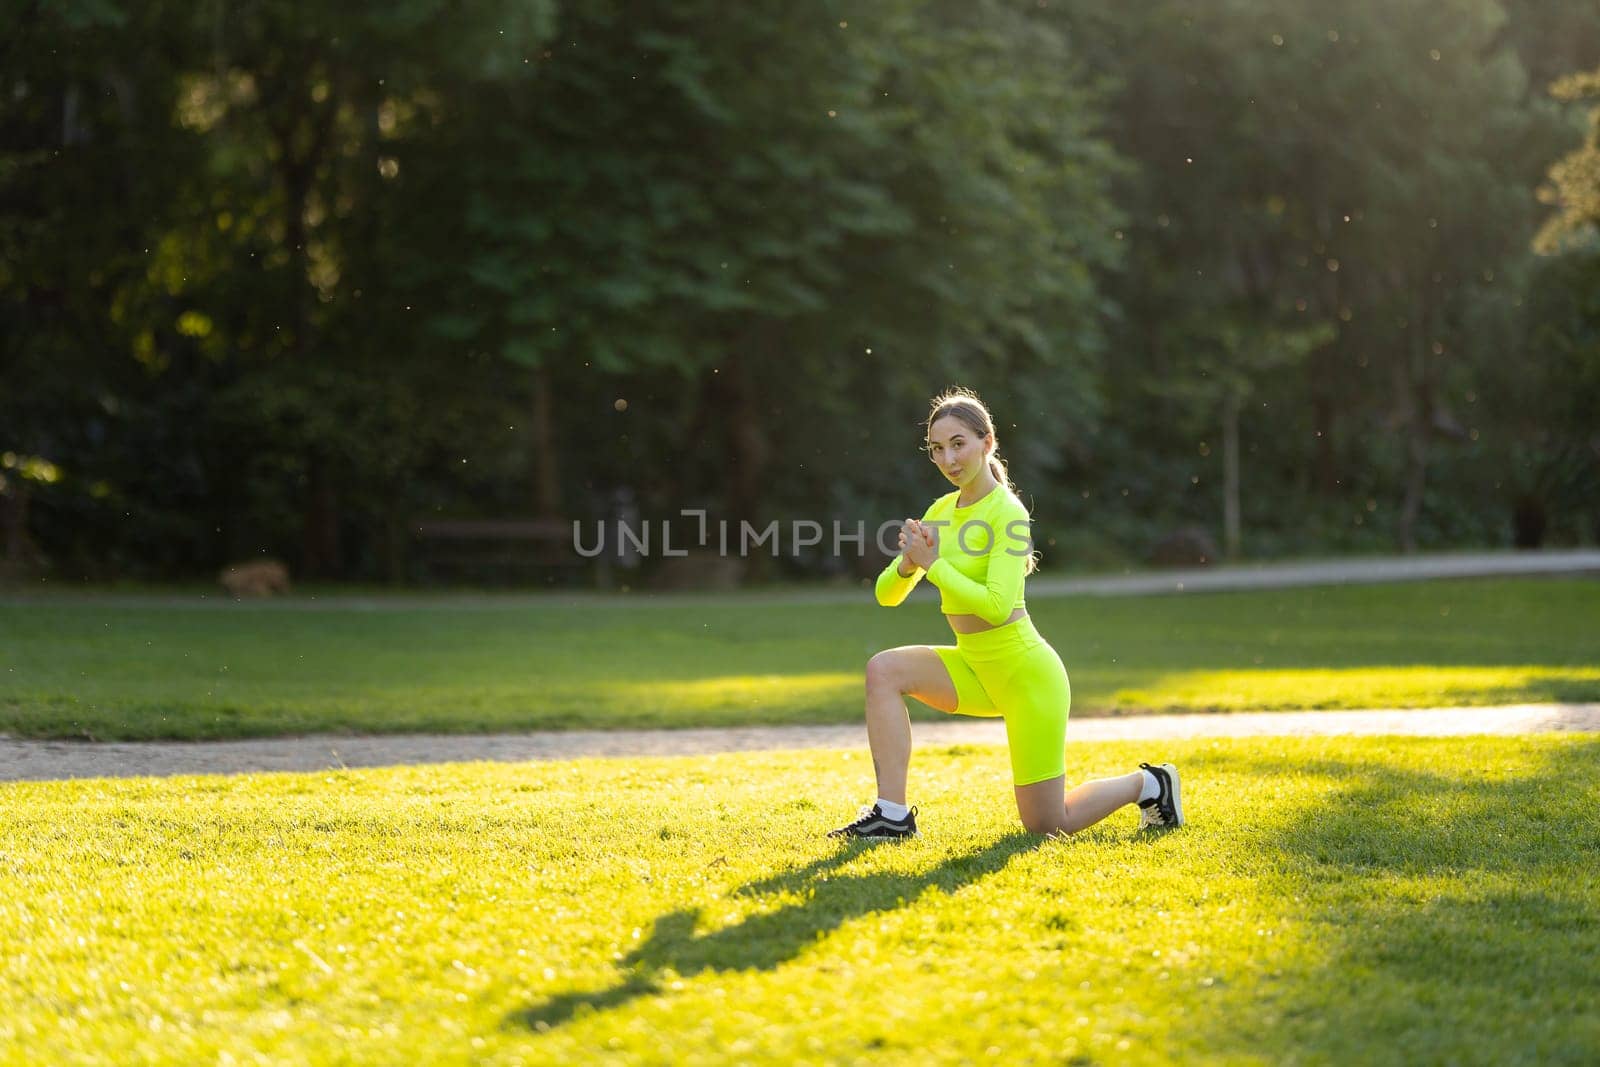 A woman in a neon green outfit is doing a yoga pose on a grassy field. The bright colors of her outfit and the lush green grass create a cheerful and energetic atmosphere